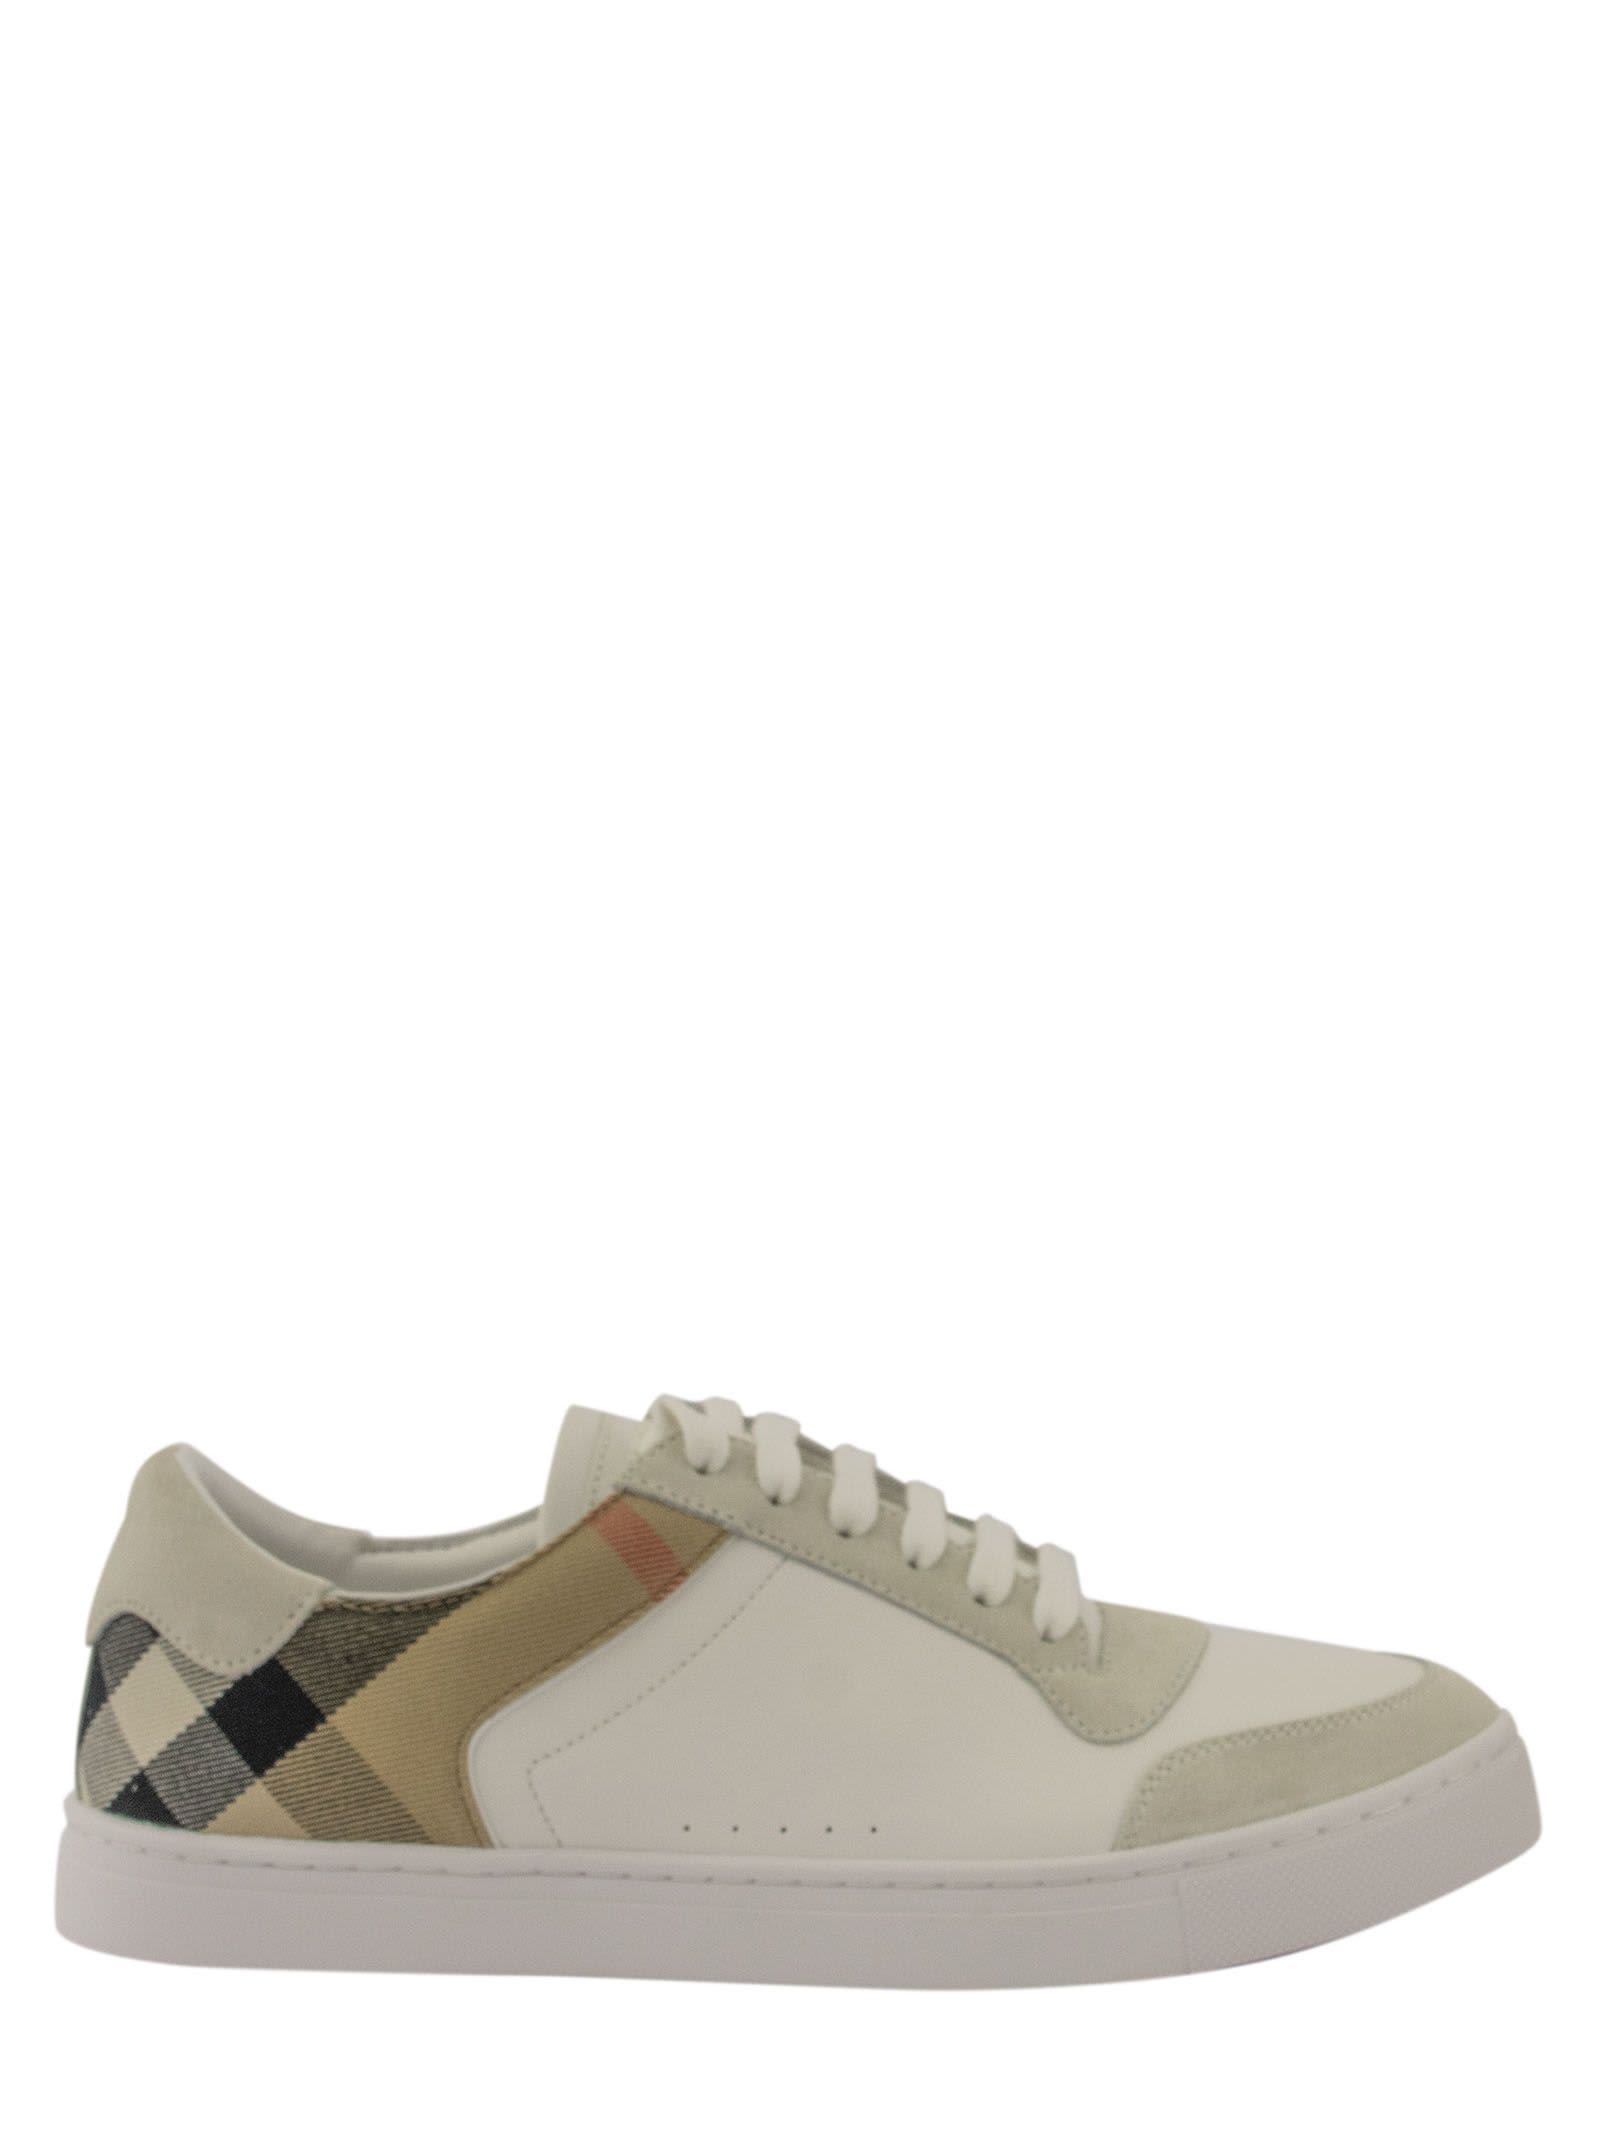 Burberry Leather And House Check Sneakers